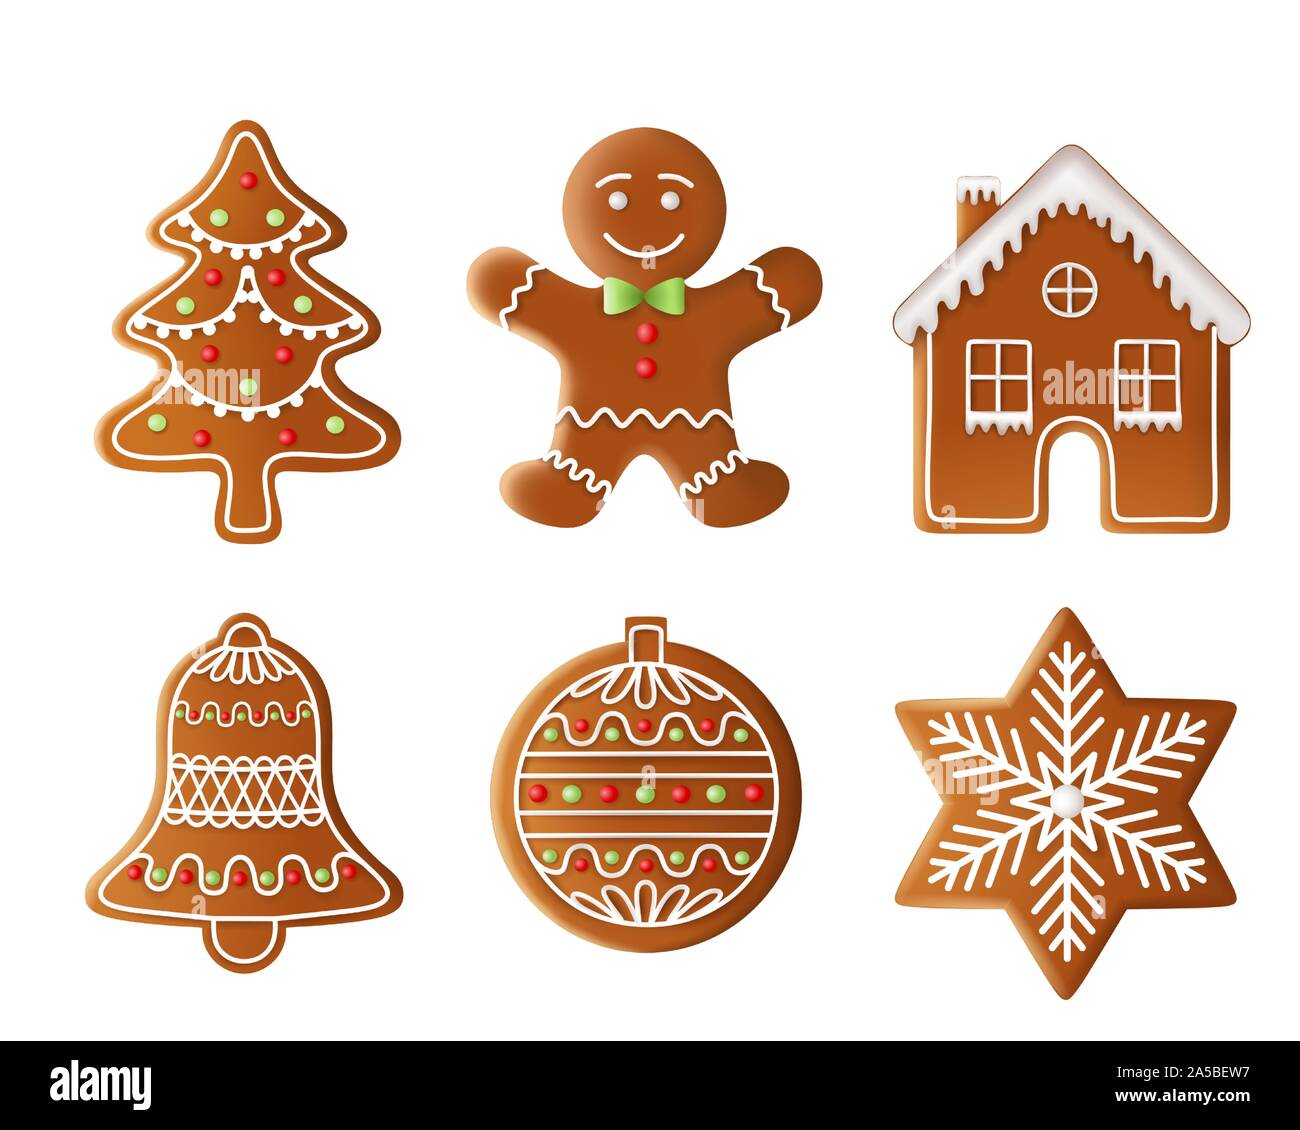 christmas tree, man, house, bell, ball and star gingerbread illustration Stock Vector